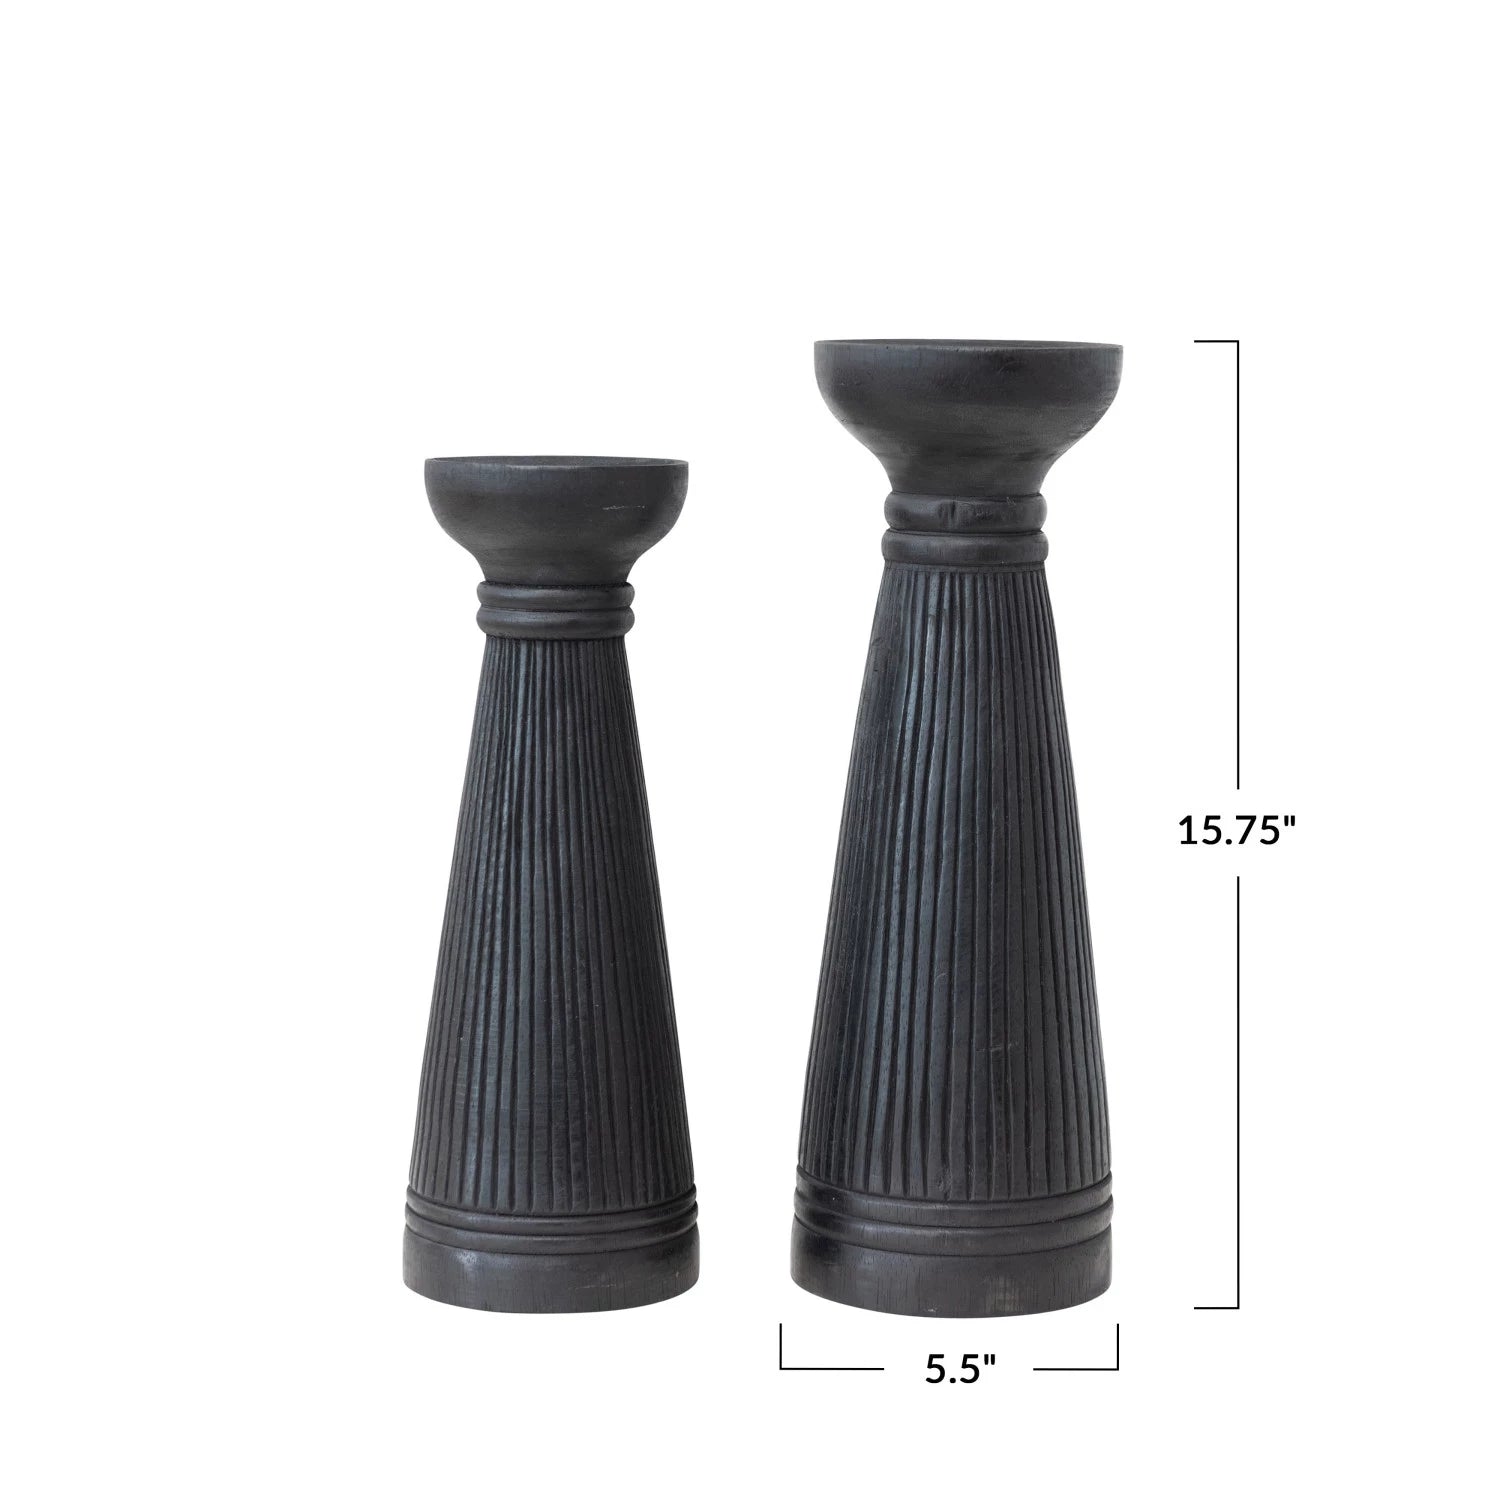 Albasia Ribbed Candle Holders